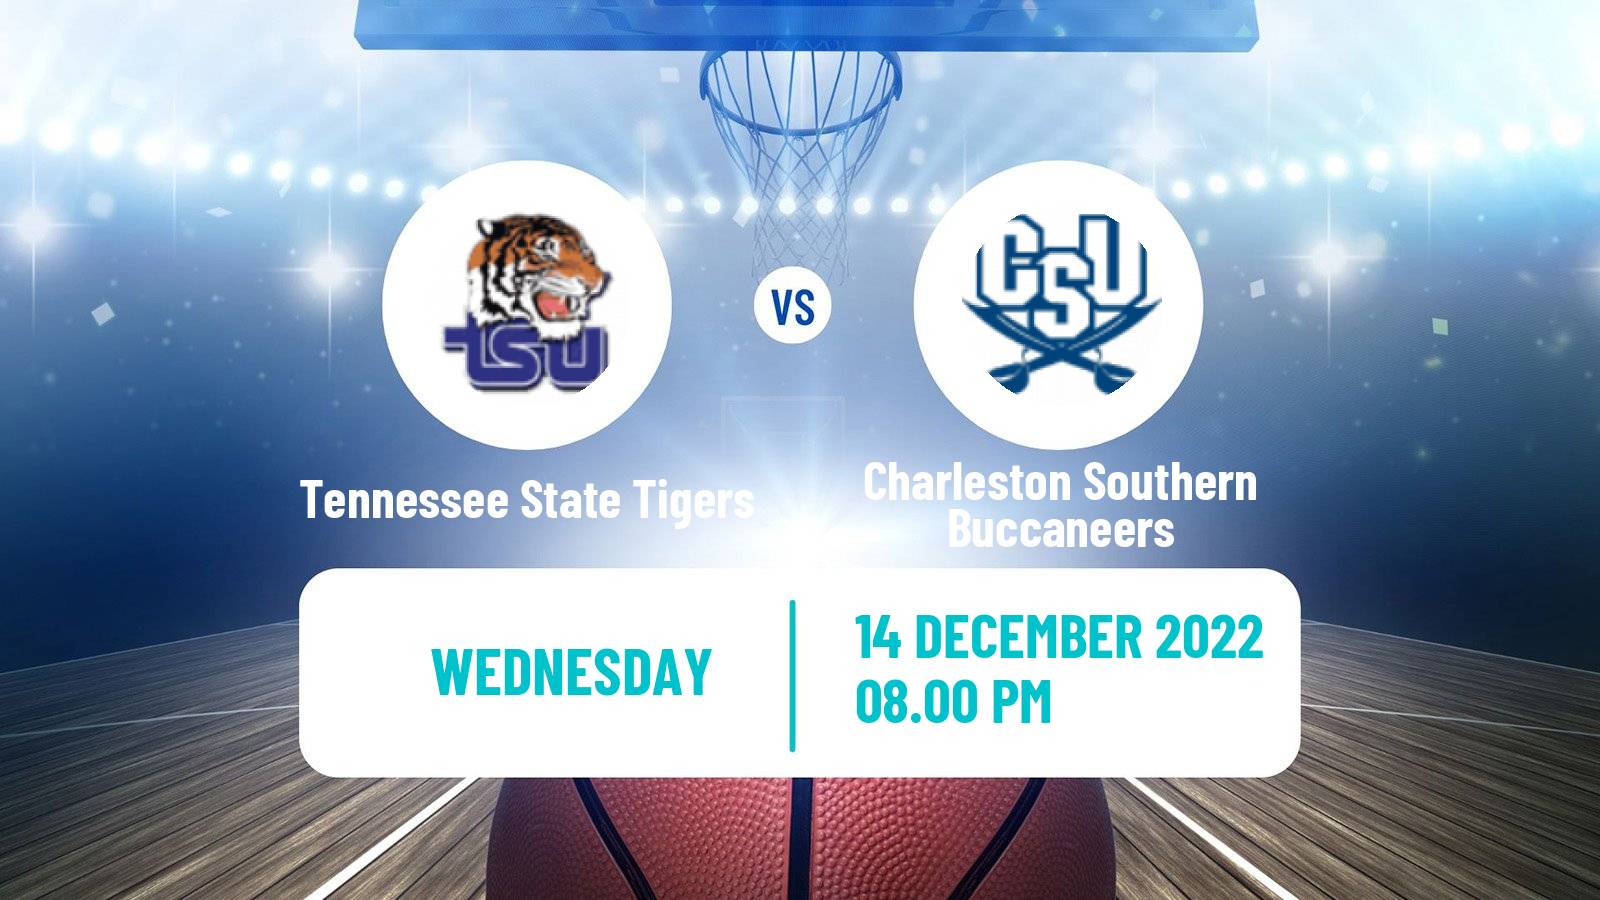 Basketball NCAA College Basketball Tennessee State Tigers - Charleston Southern Buccaneers